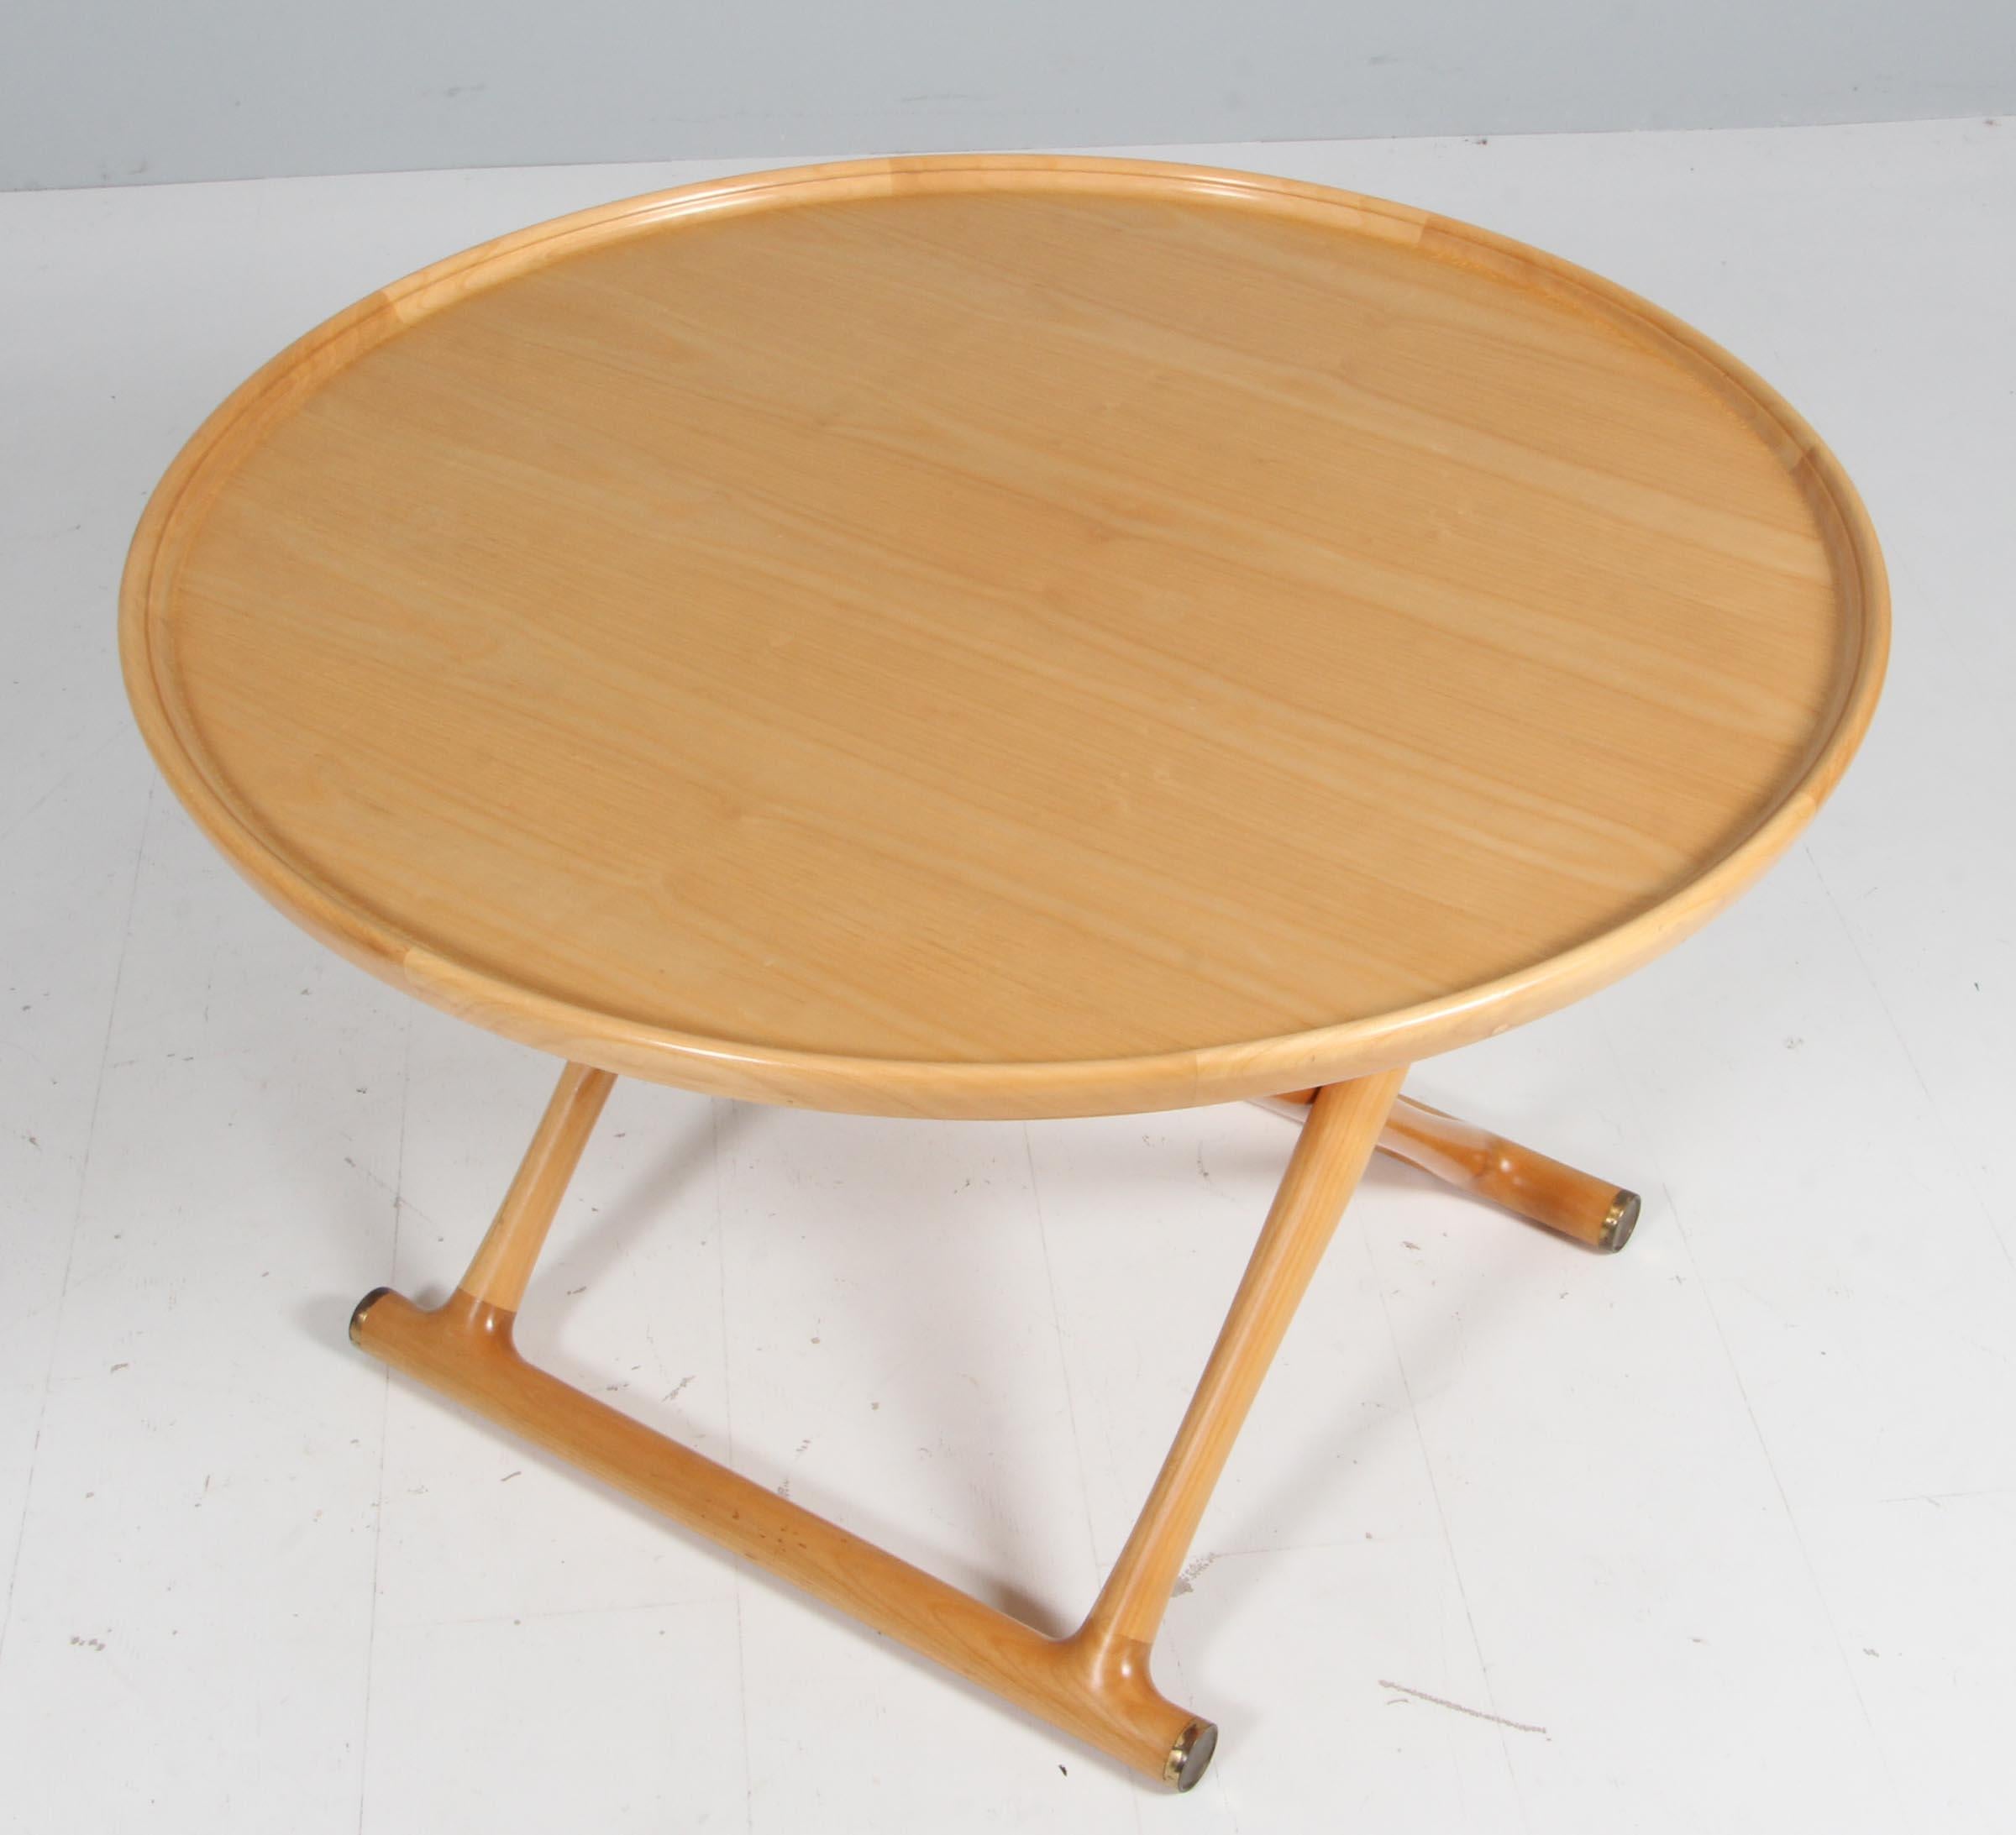 Mogens Lassen round coffee table in partly solid Elm wood. Brass details.

Model Egyptian table, made by Rud Rasmussen.